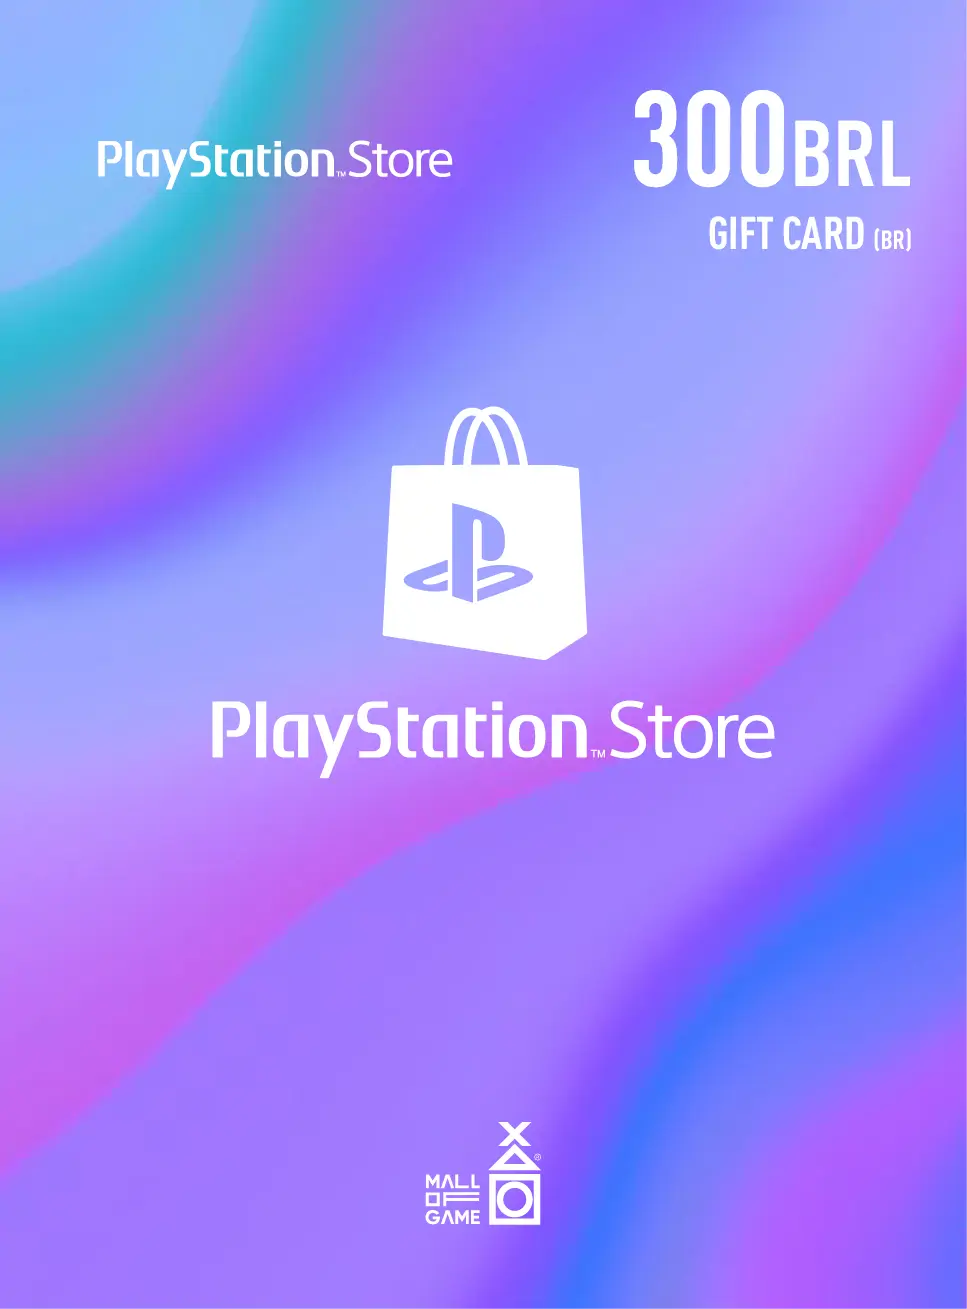 PlayStation™Store BRL300 Gift Cards (BR)